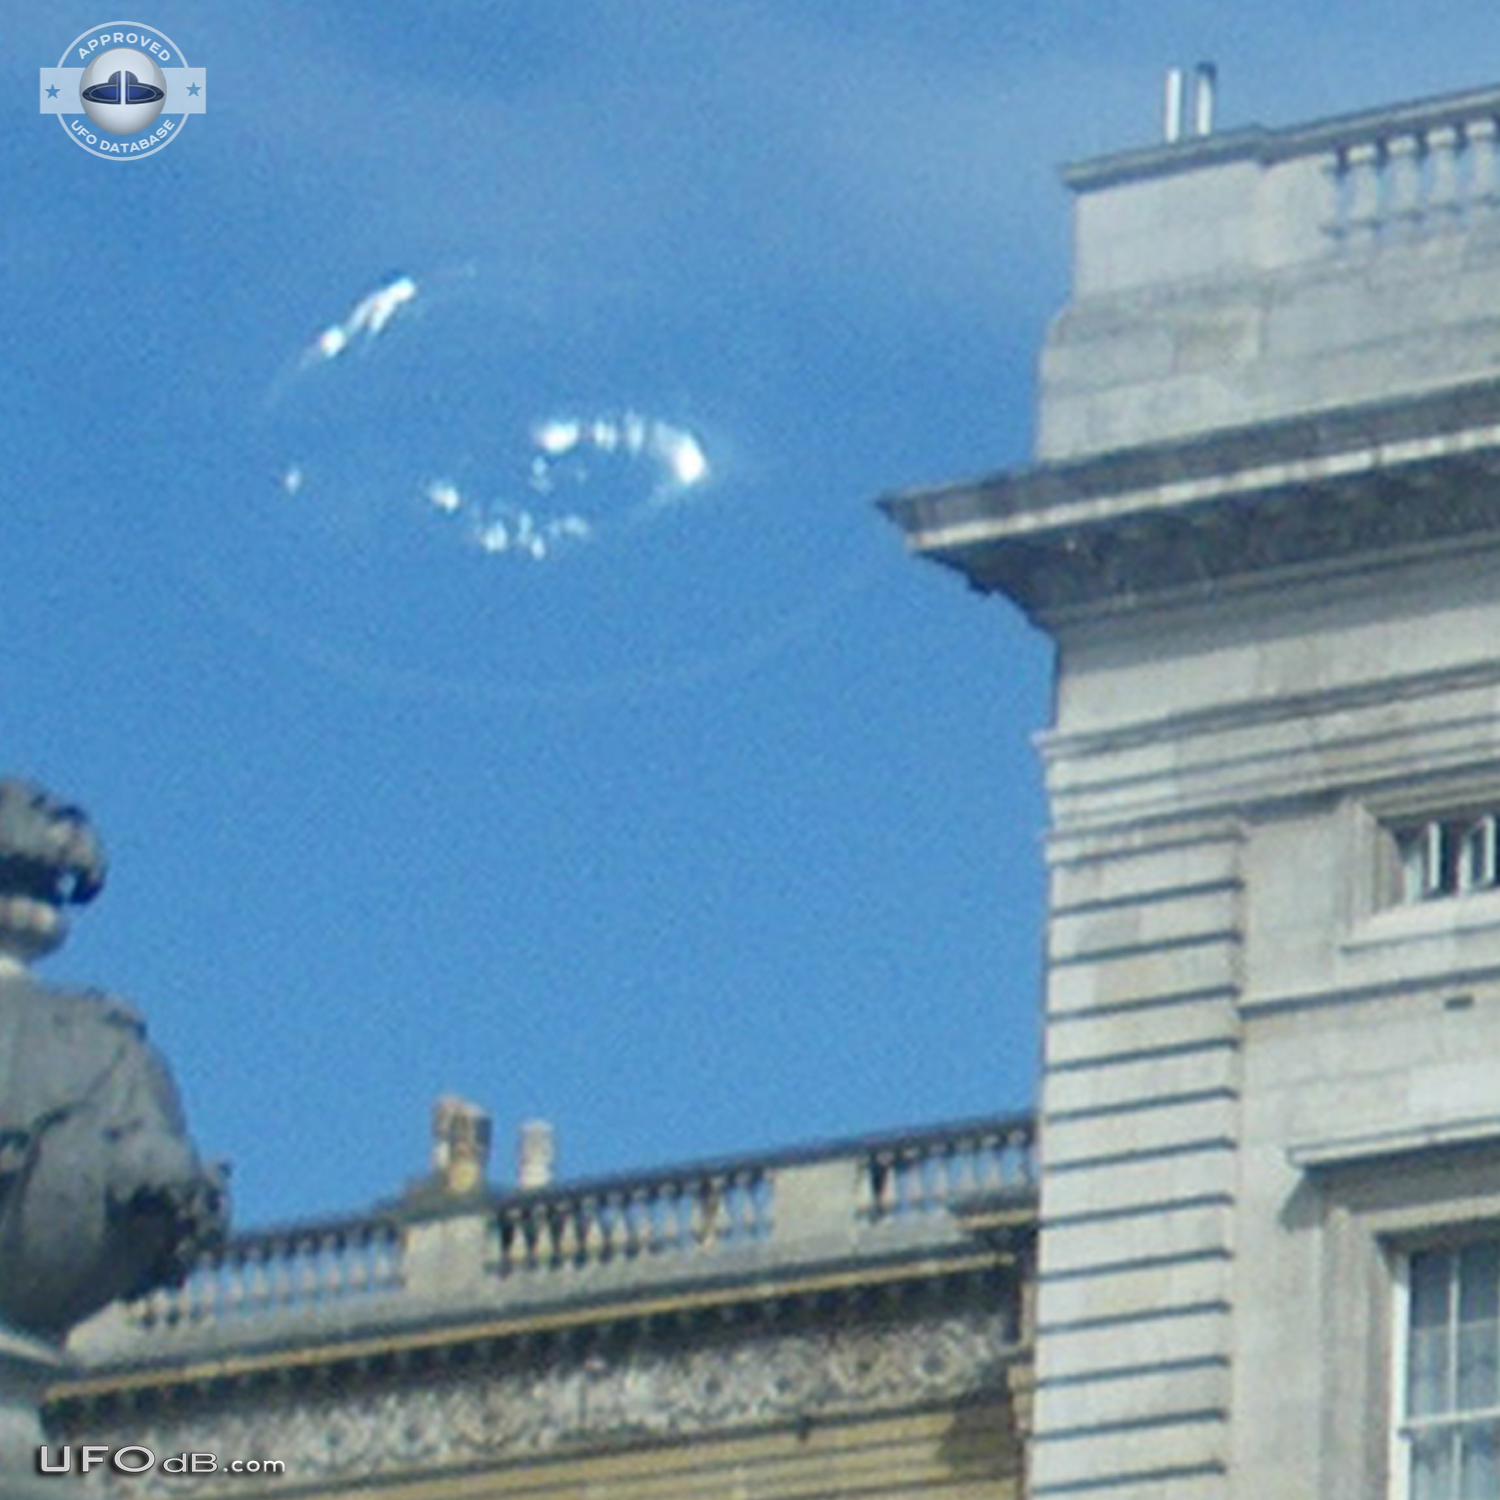 Strange ring UFO with clouds over Buckingham palace London UK 2012 UFO Picture #525-3